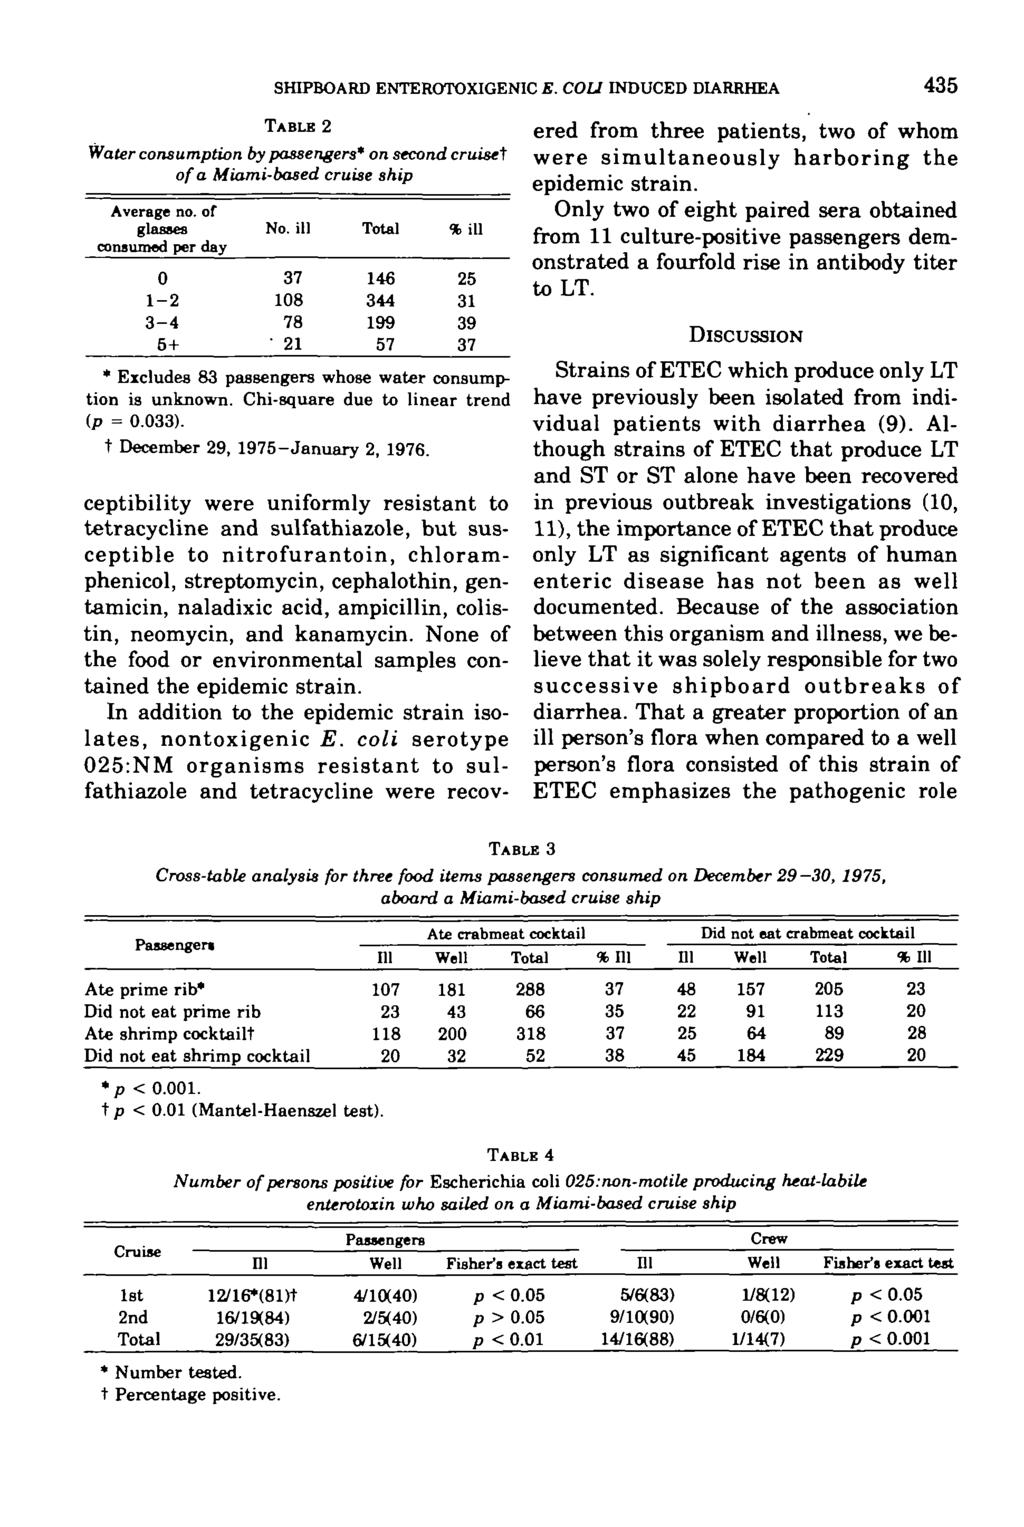 SHIPBOARD ENTEROTOXIGEN1C E. COU INDUCED DIARRHEA 435 TABLE 2 Water consumption by passengers* on second cruiset of a Miami-based cruise ship Average no. of glasses consumed per day 1-2 3-4 5+ No.